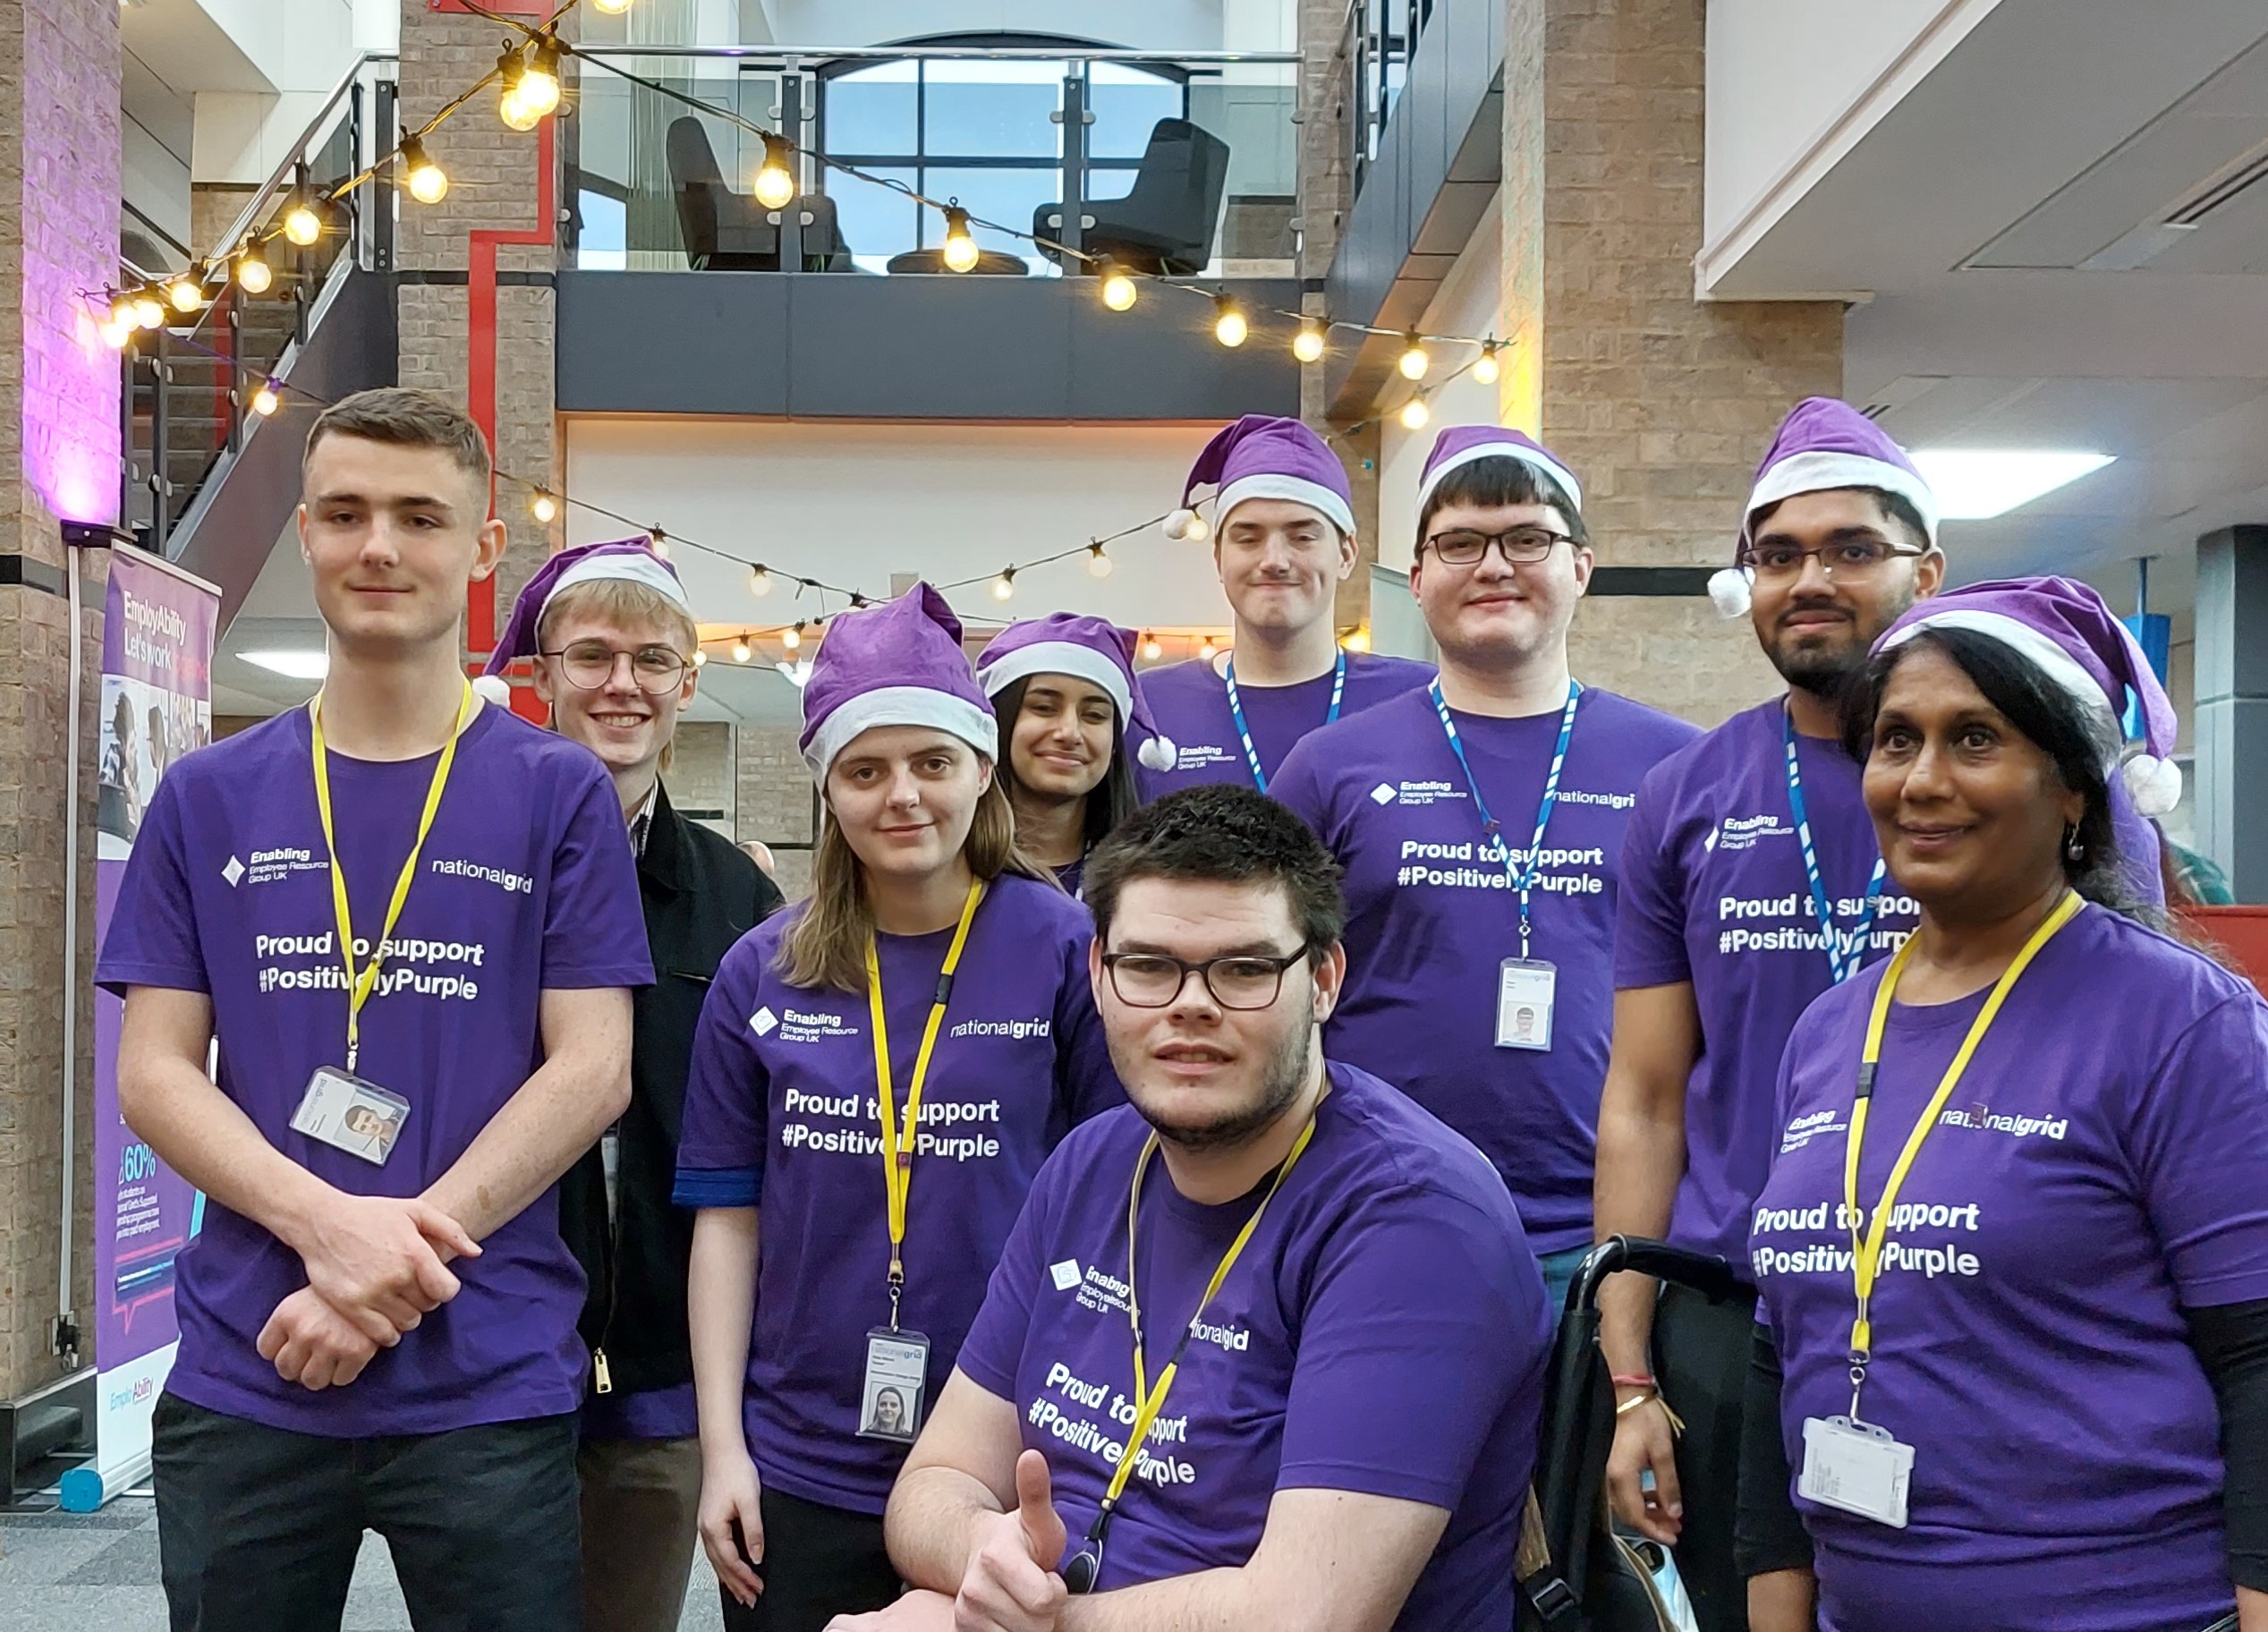 Image for Festive market organised by students raises hundreds for charity